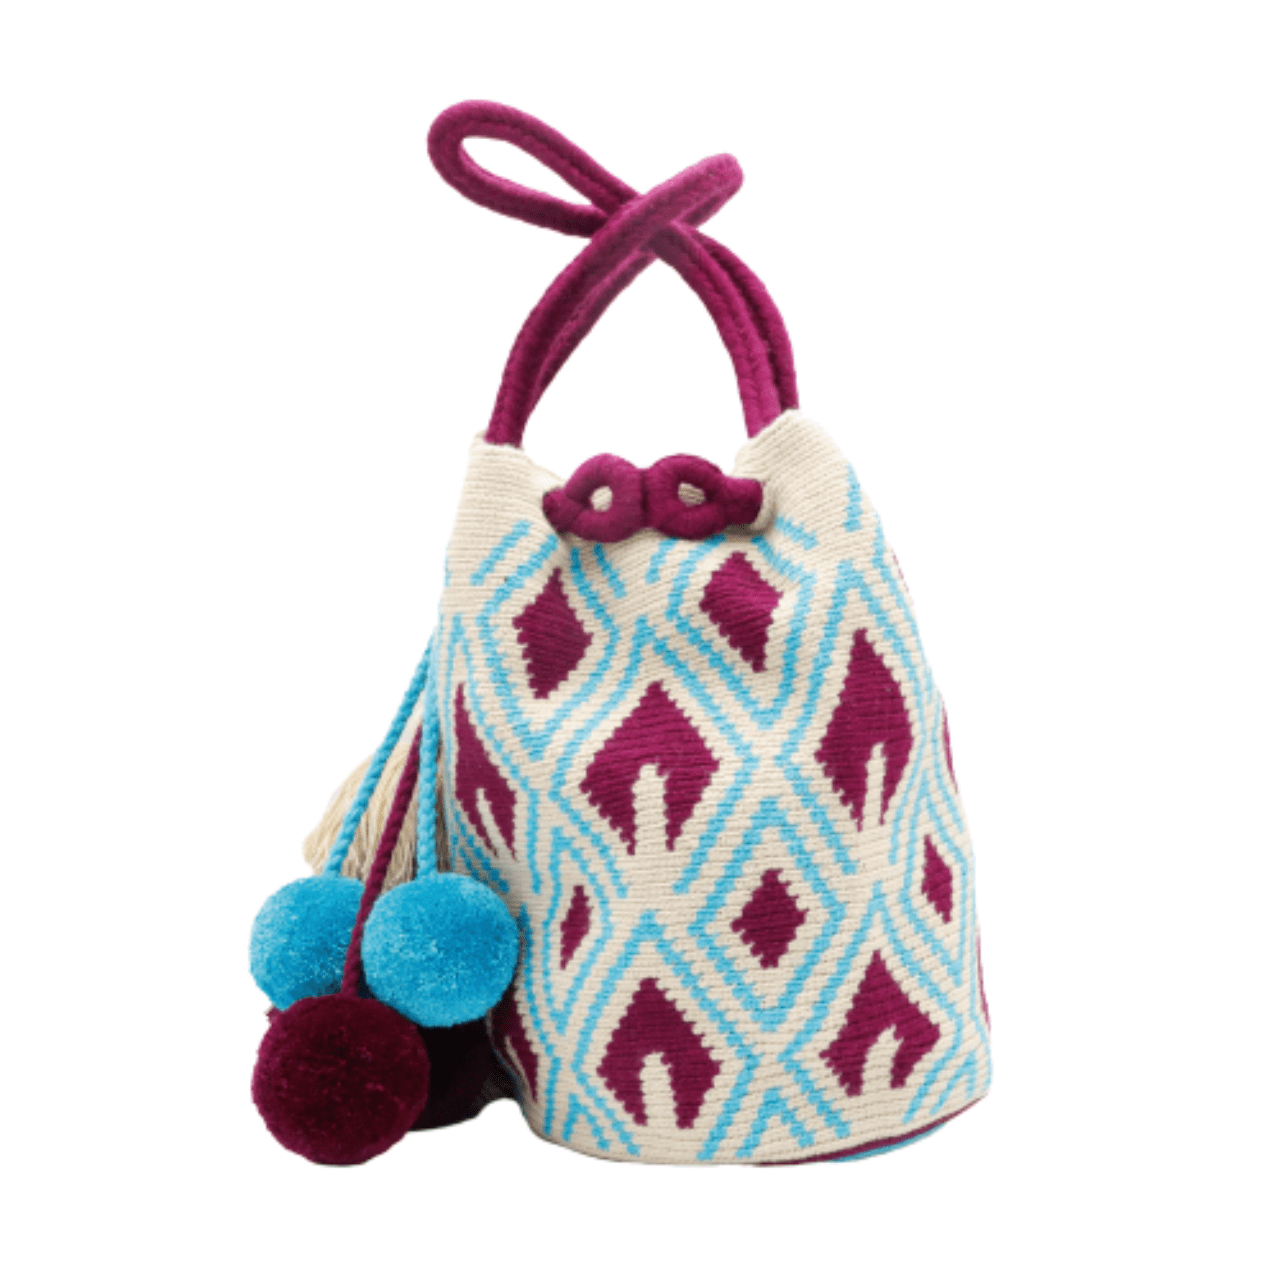  Demi Large Tote Bag for Women in Aqua, Beige, and Magenta with Intricate Design, Braided Handles, Tassels, and Pom Poms.